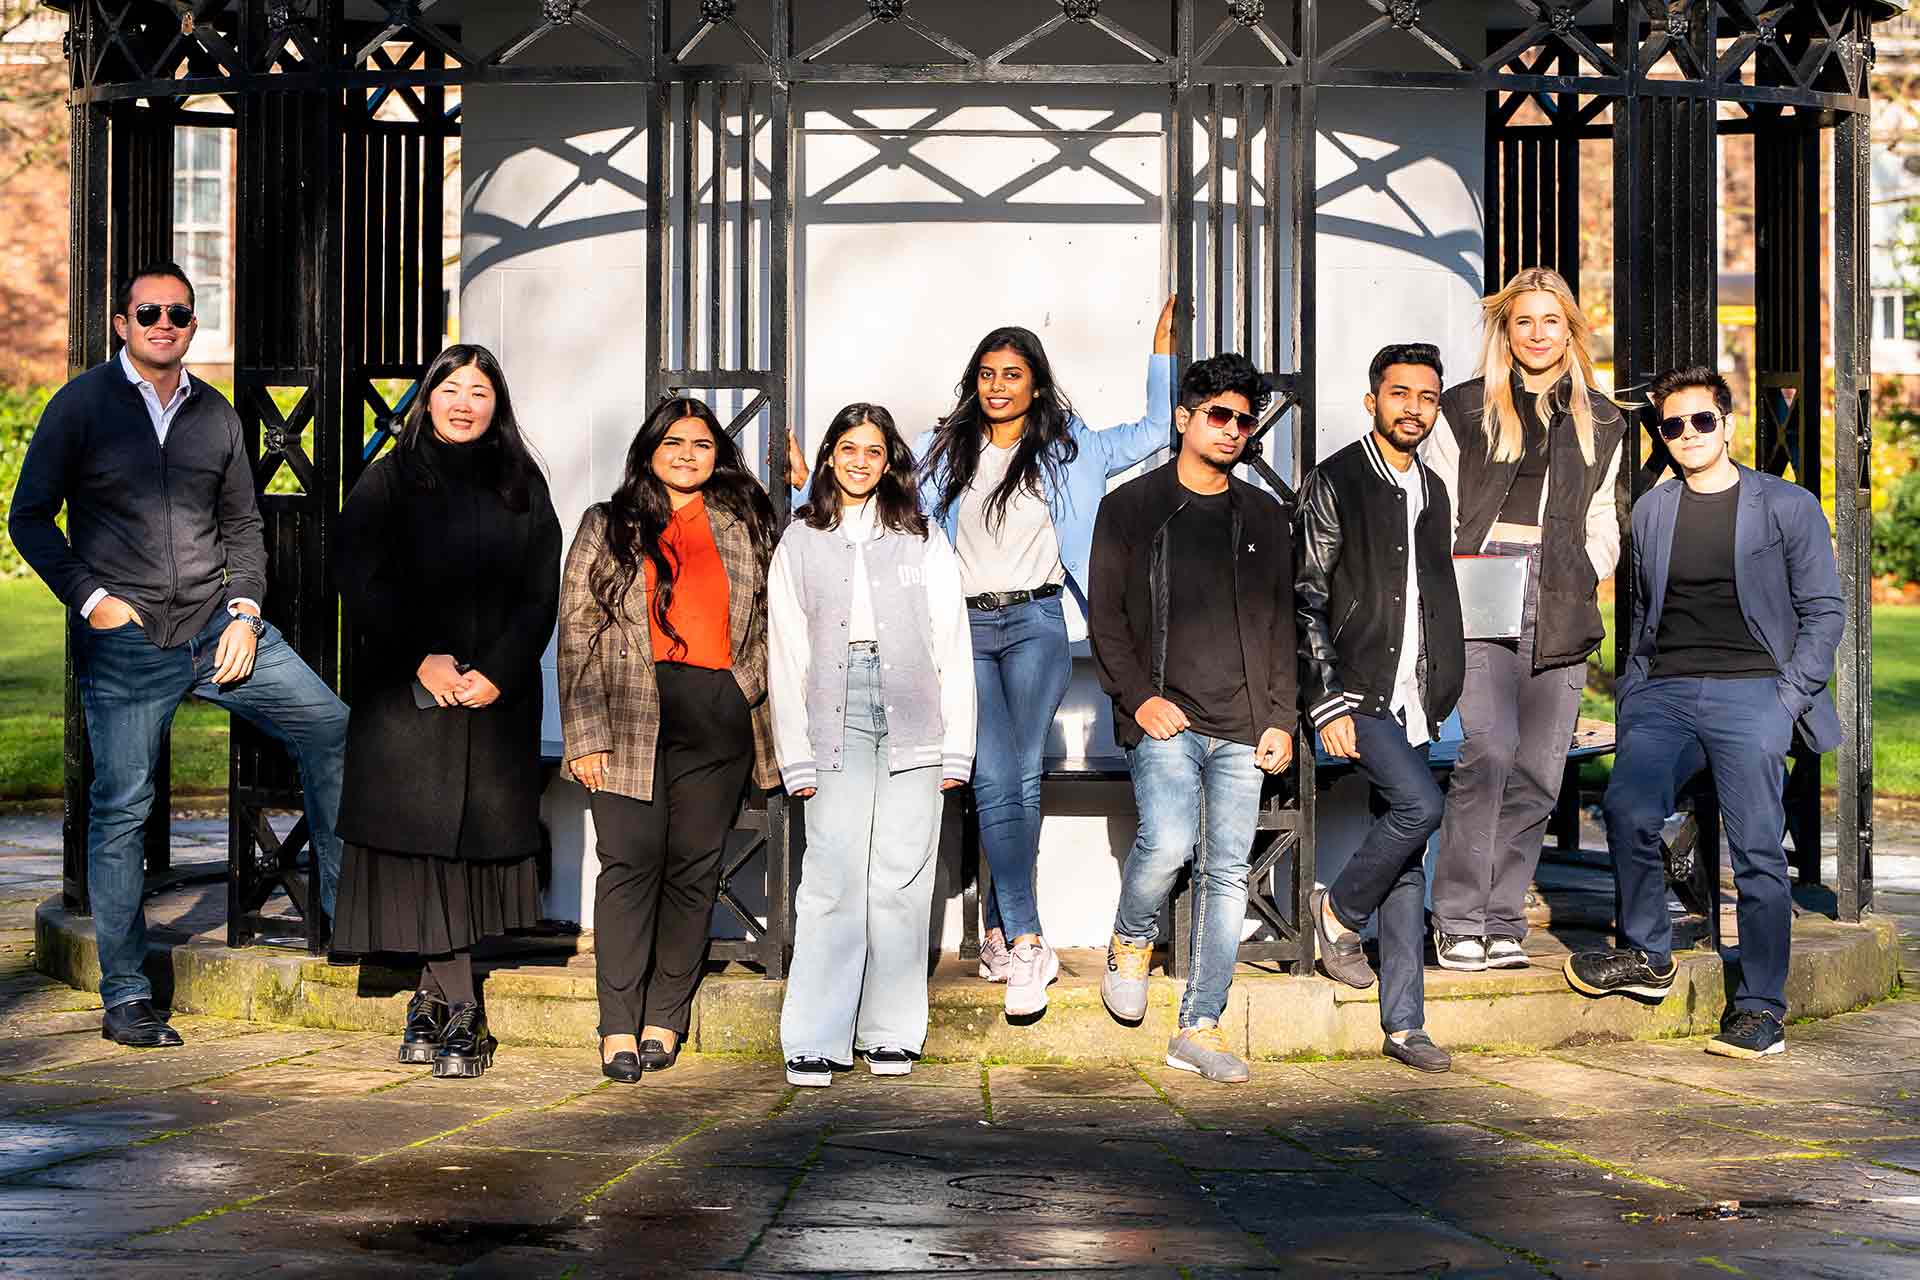 Master's students in Abercromby Square on campus